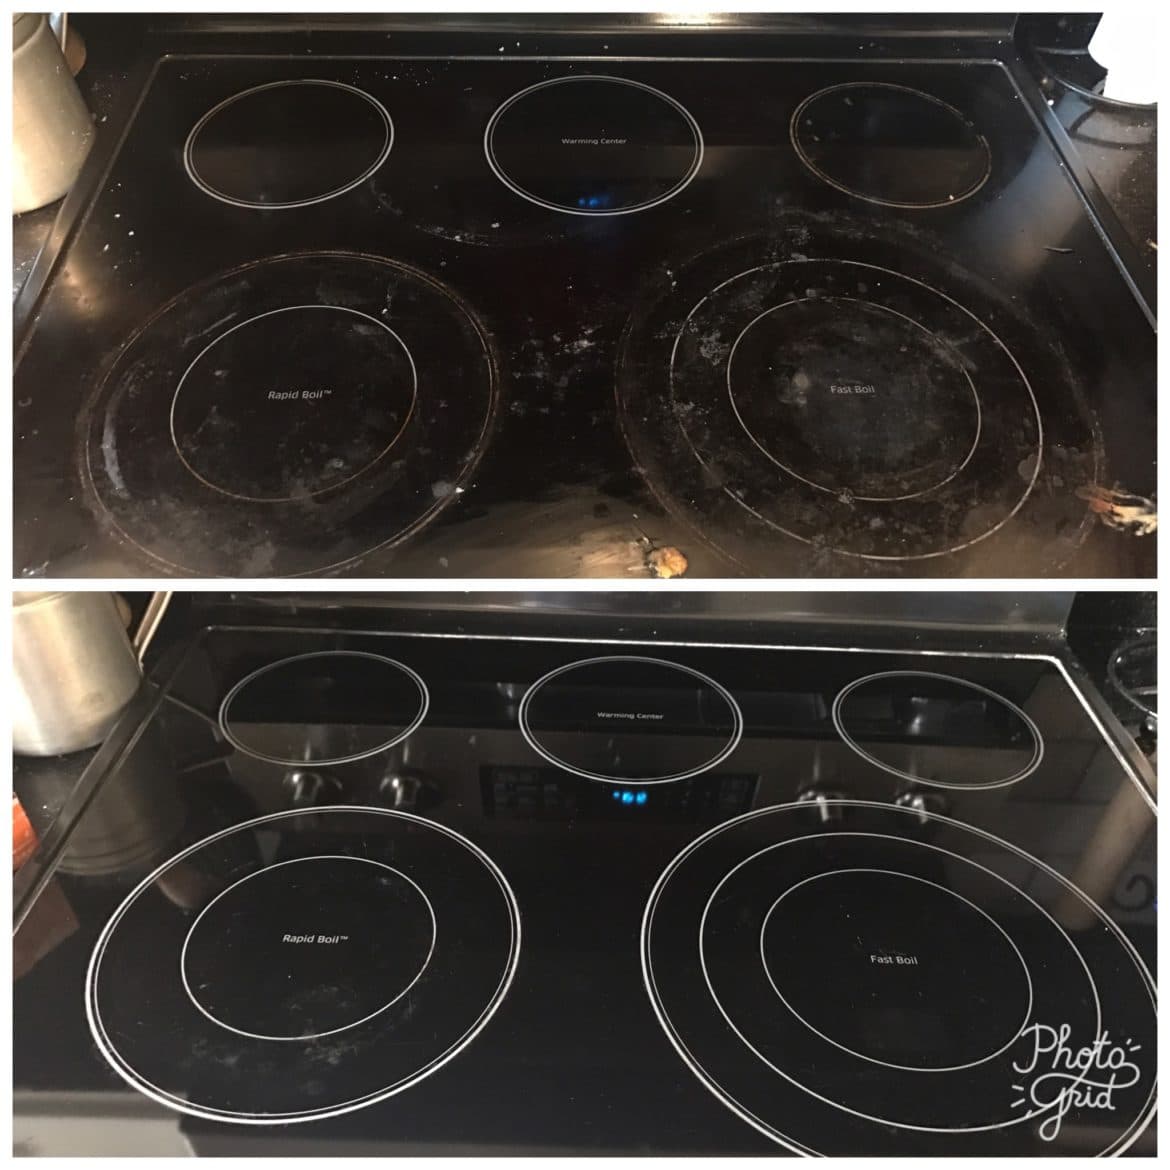 Glass Cooktop Cleaning Tips - How to Clean a Glass Stovetop